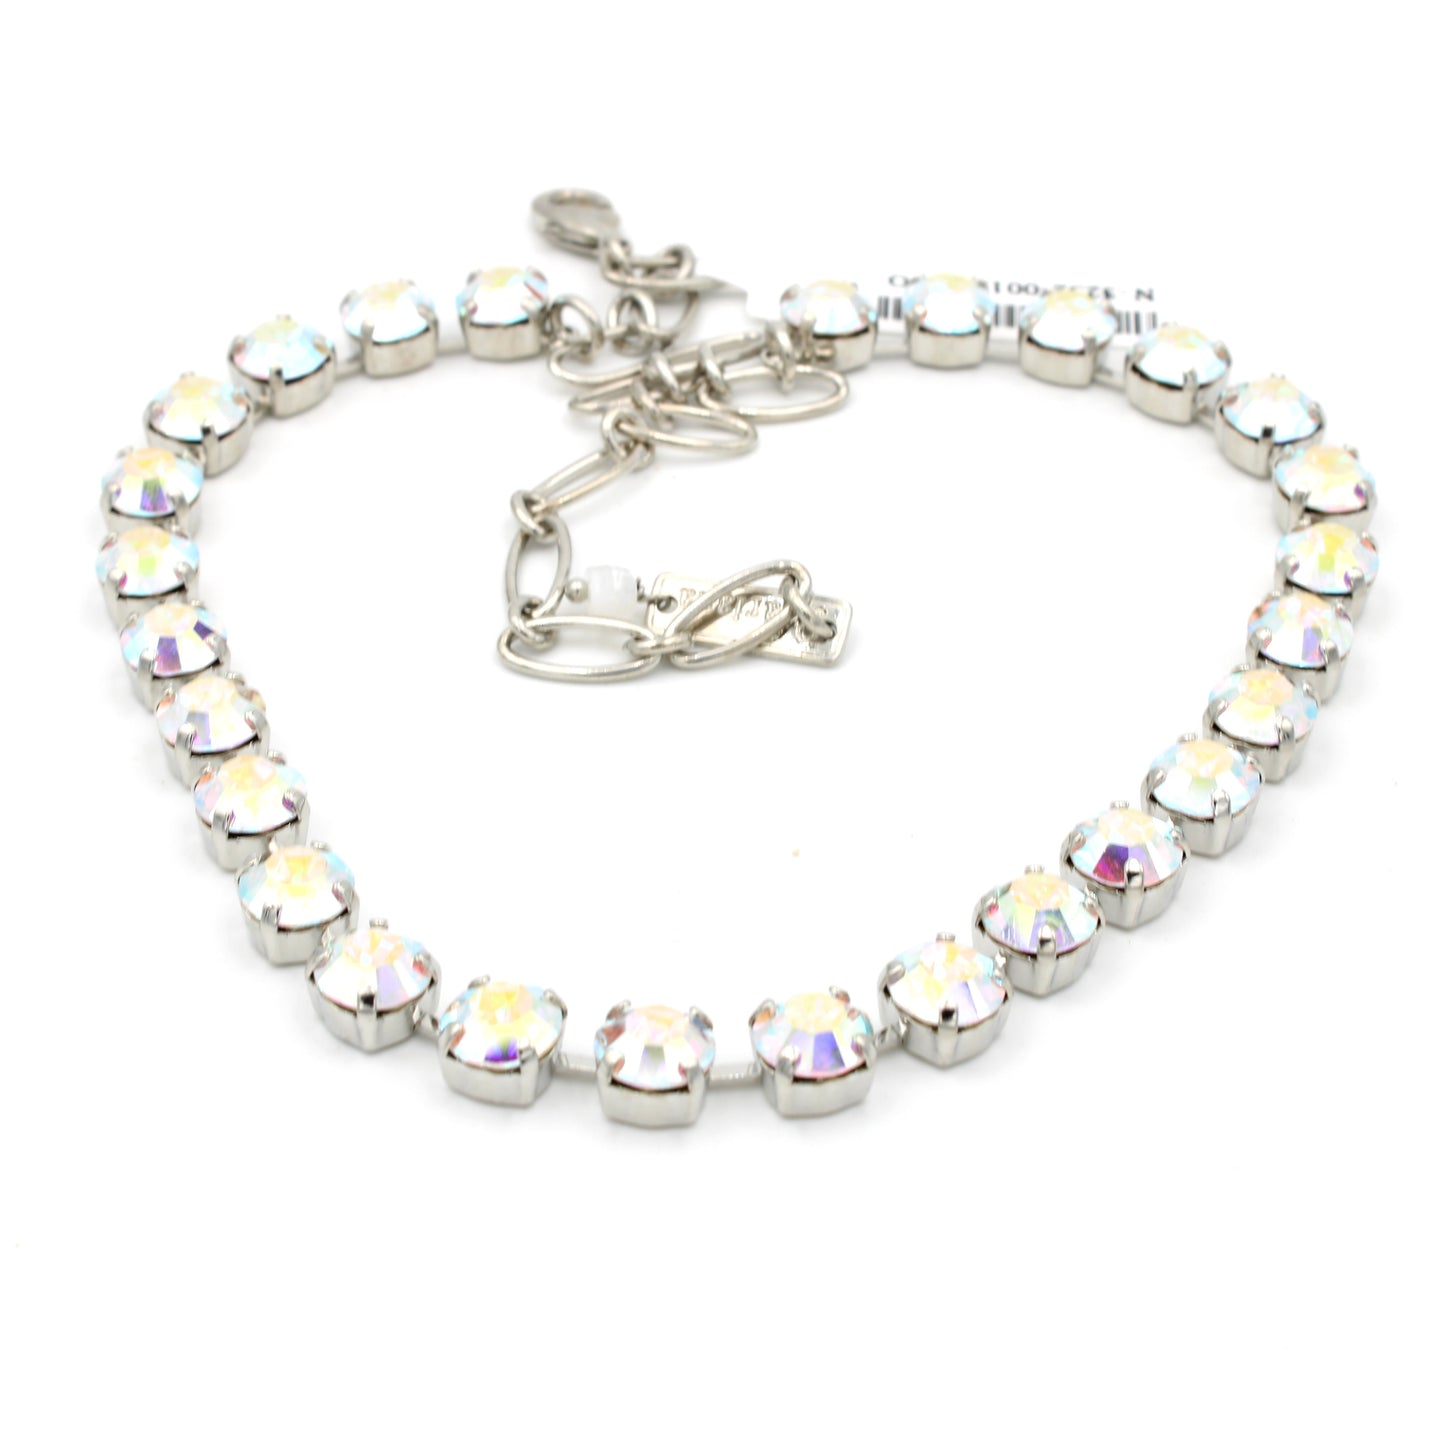 Crystal AB Super Sparkly Must Have Everyday Necklace - MaryTyke's